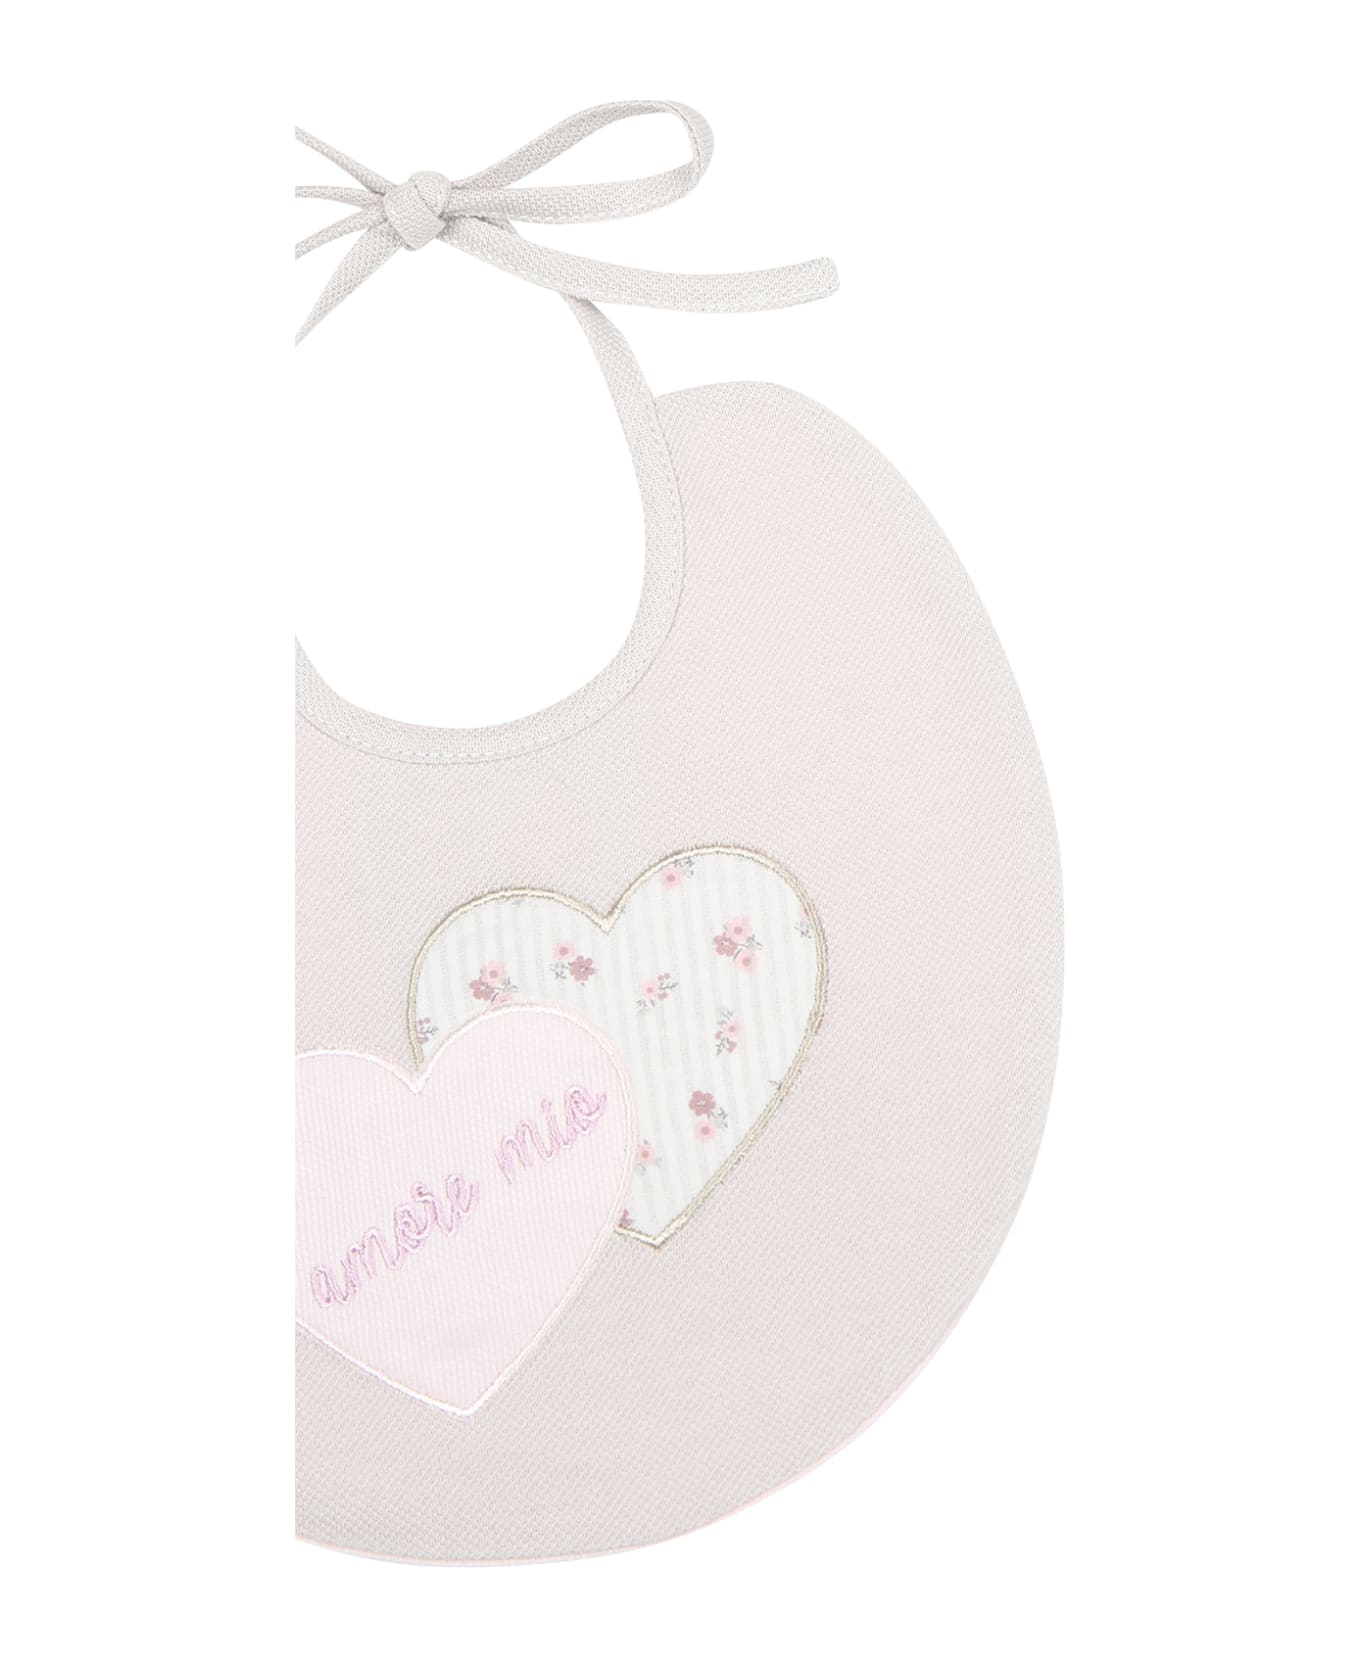 La stupenderia Beige Bib For Baby Girl With Hearts And Writing - Beige アクセサリー＆ギフト